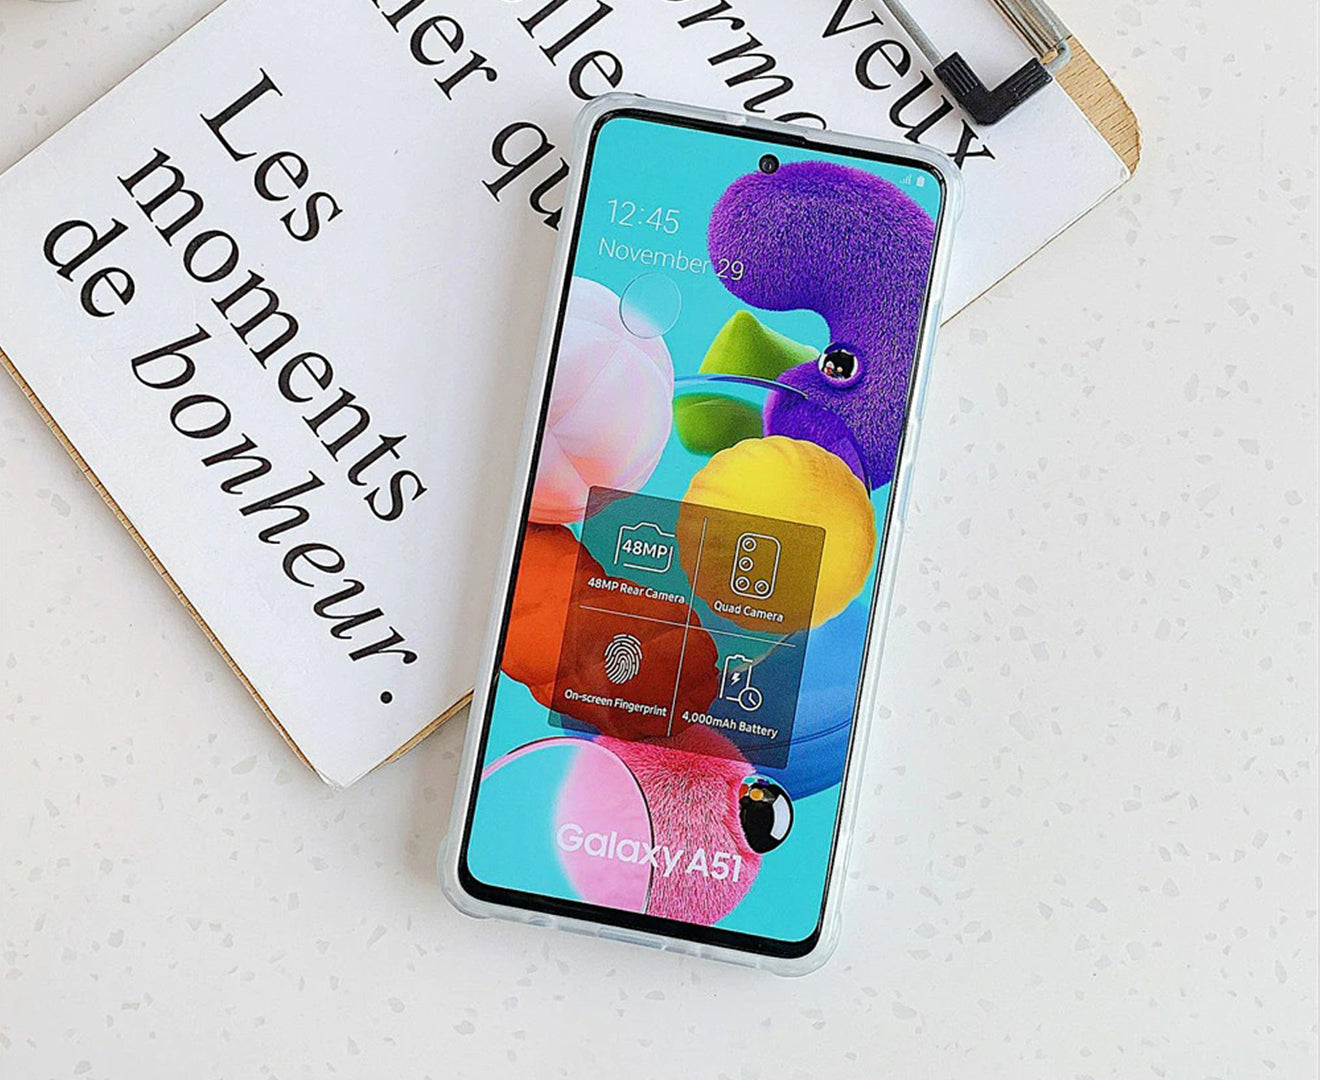 Anymob Samsung Phone Case Light Slate Marble Mobile Cover For S21 Plus Ultra S10 Plus S20 Plus Ultra S20 FE Lite Note 10 A50 30S 50S A51 A71-Mobile Phone Cases-PEROZ Accessories